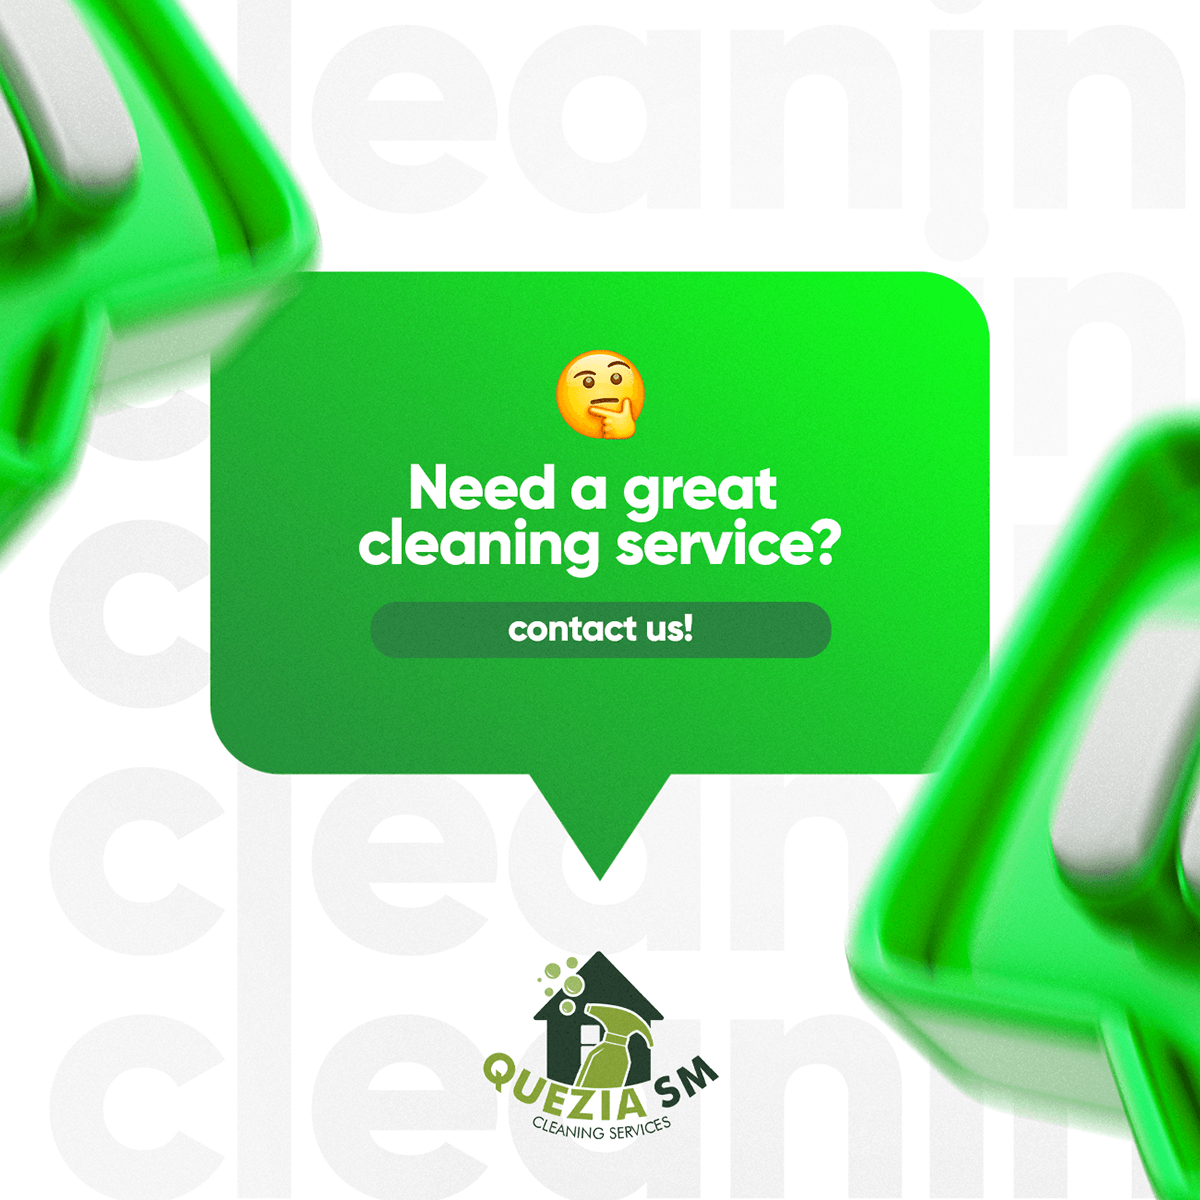 Limpeza housecleaning cleaningservices ServiçoDeLimpeza